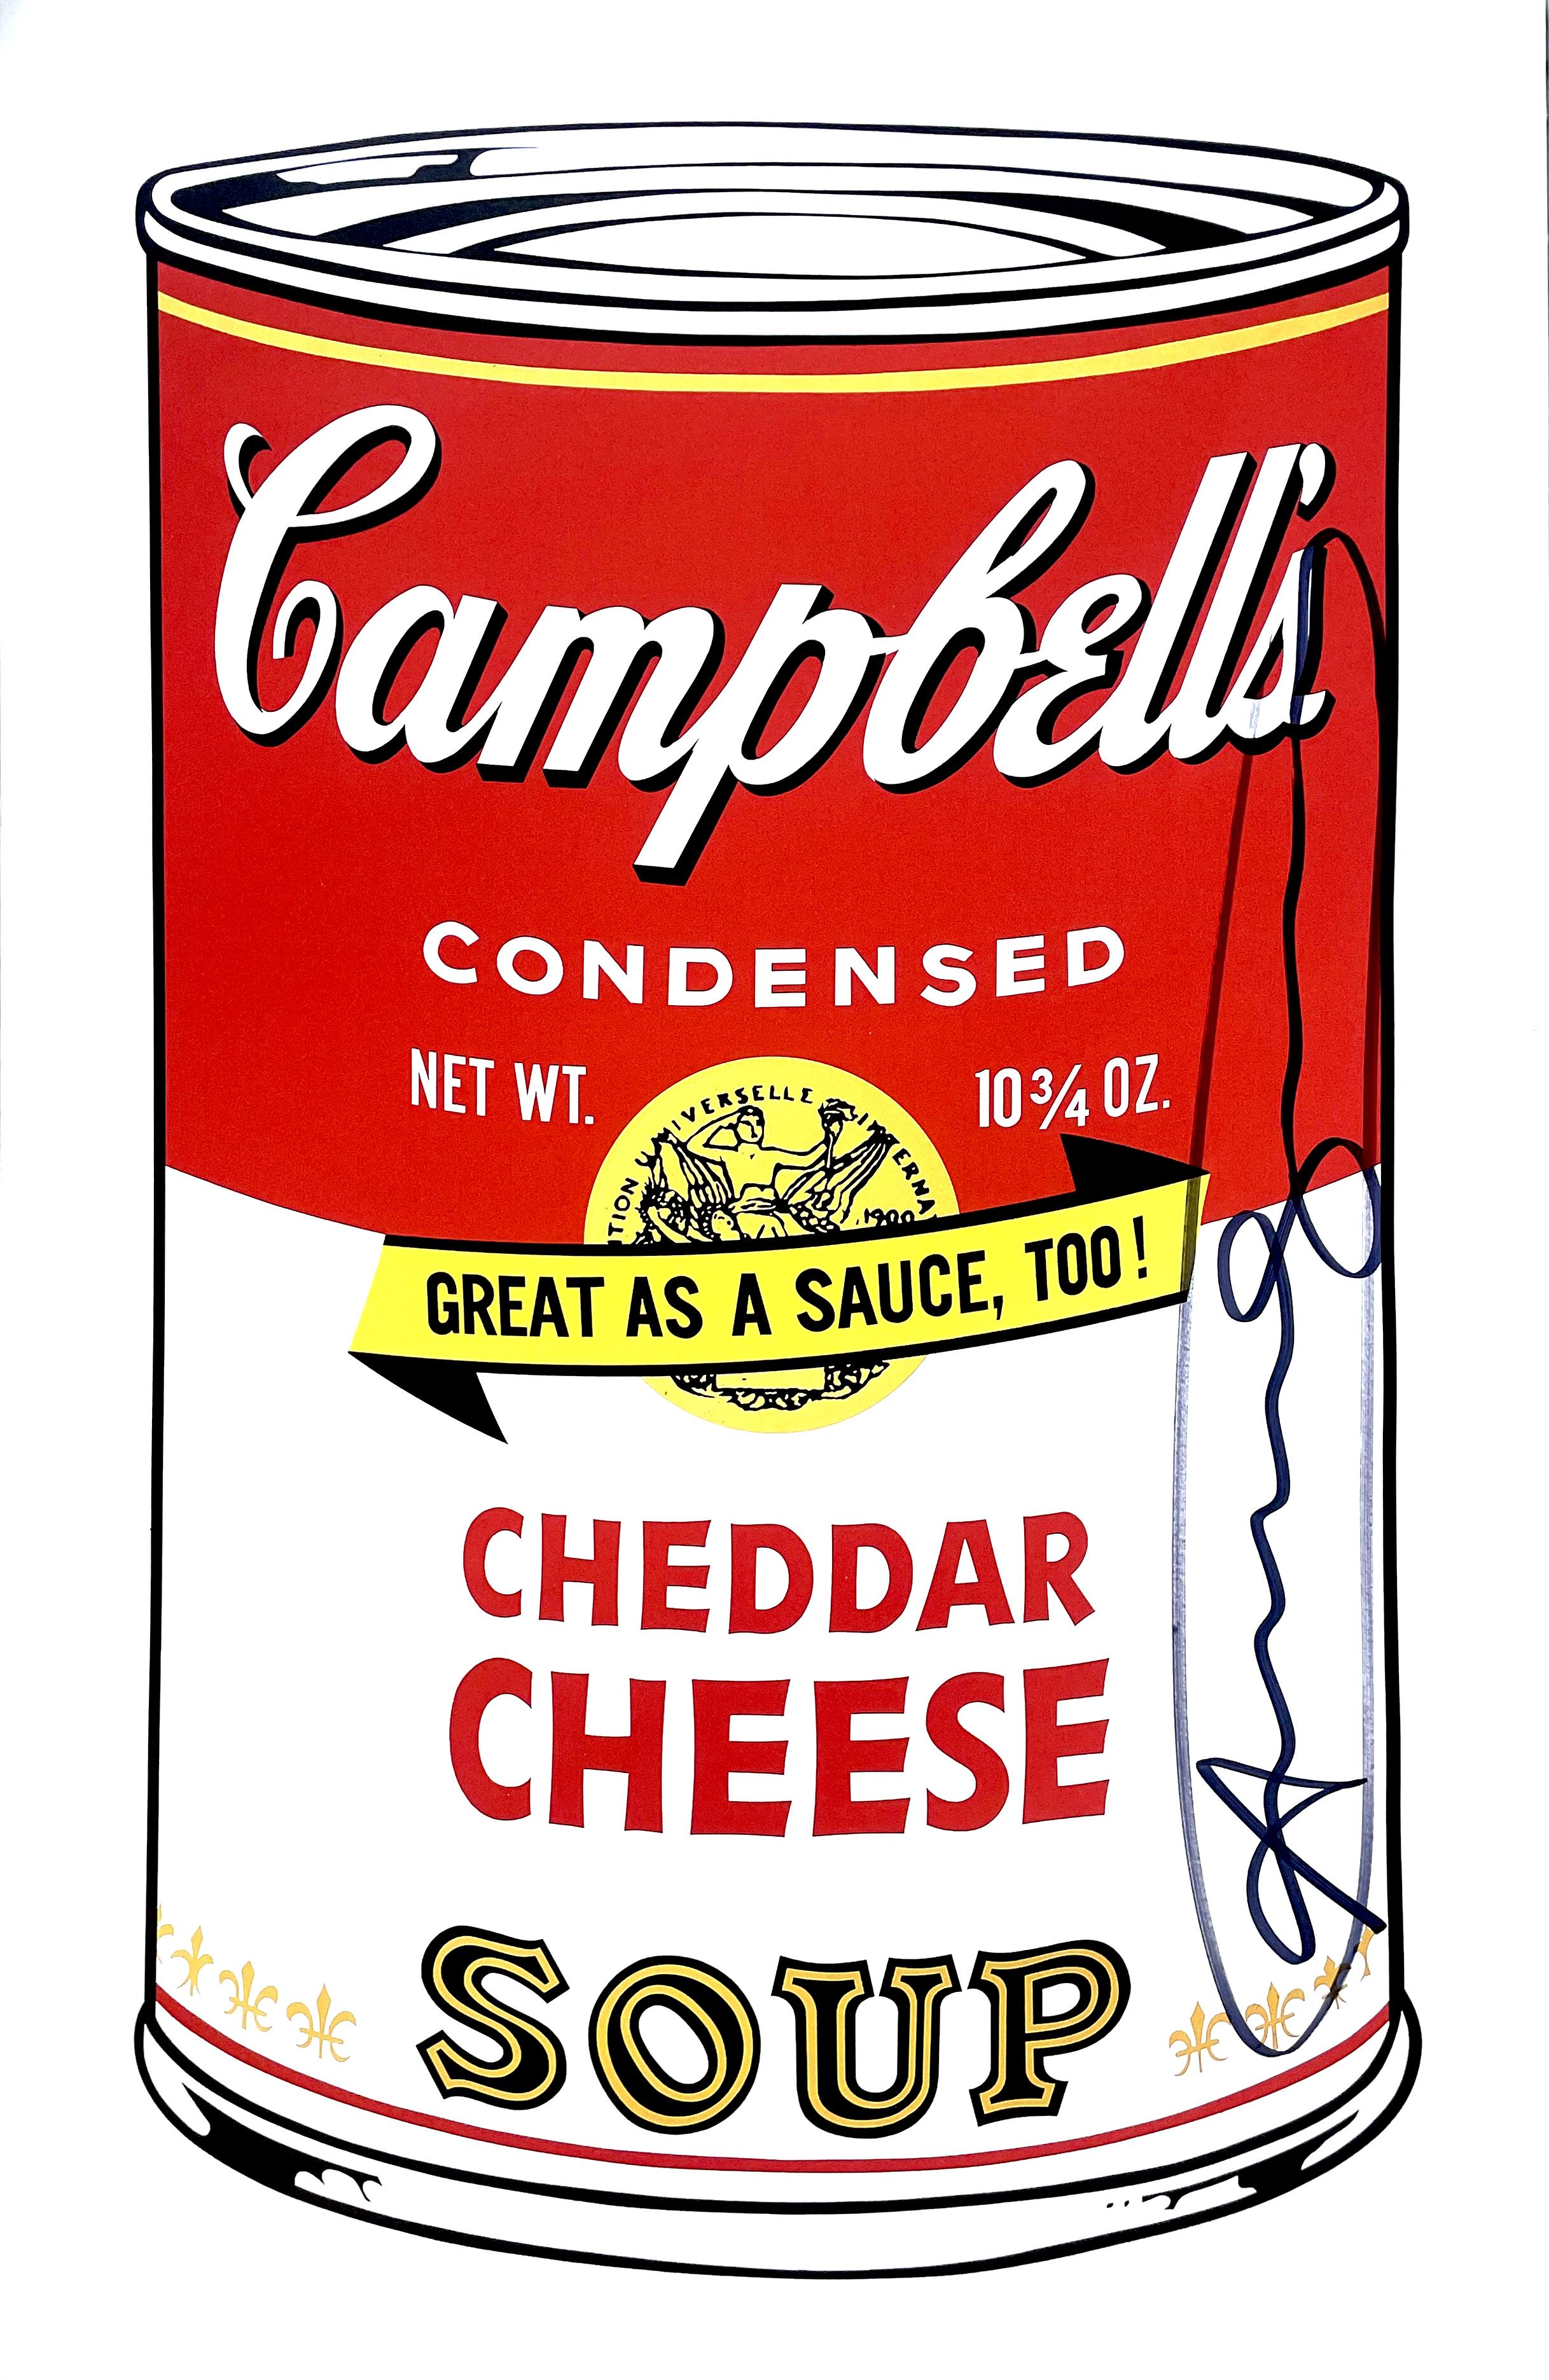 Campbells - Tomato Soup - Mixed Media Art by Andy Warhol